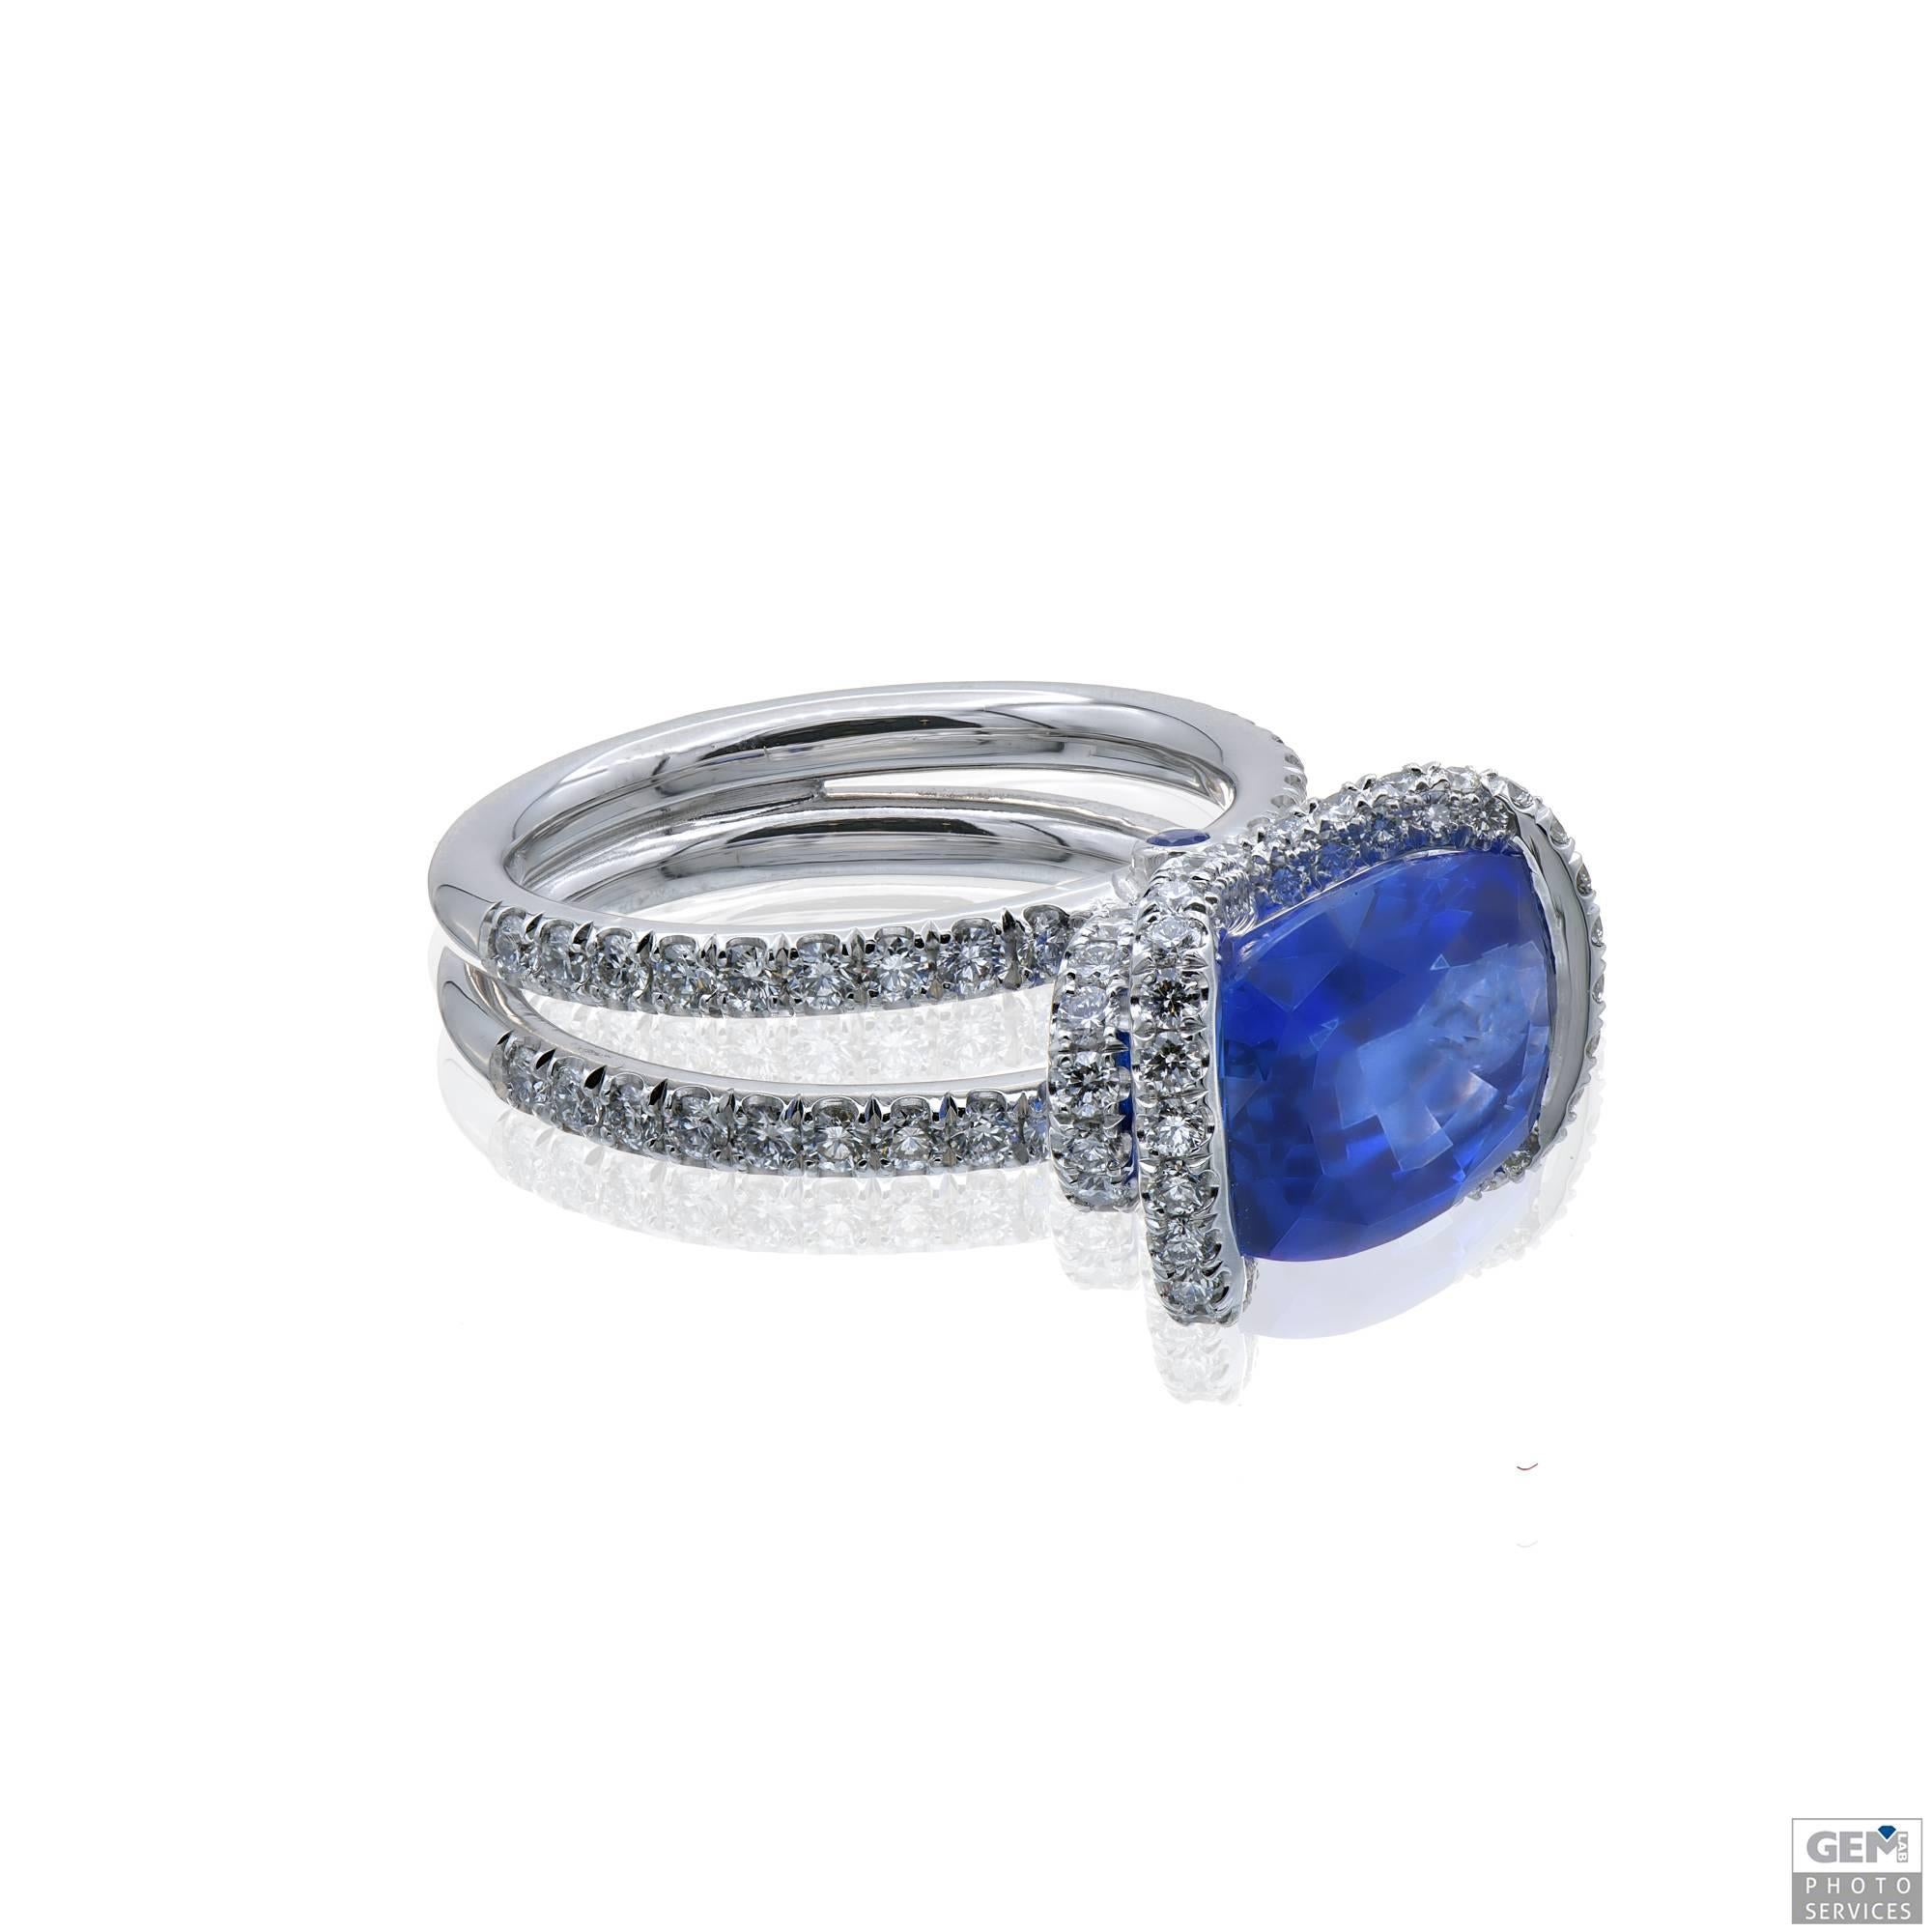 Cushion Cut Handmade Cushion Sapphire Ring in White Gold, Set with Diamonds For Sale